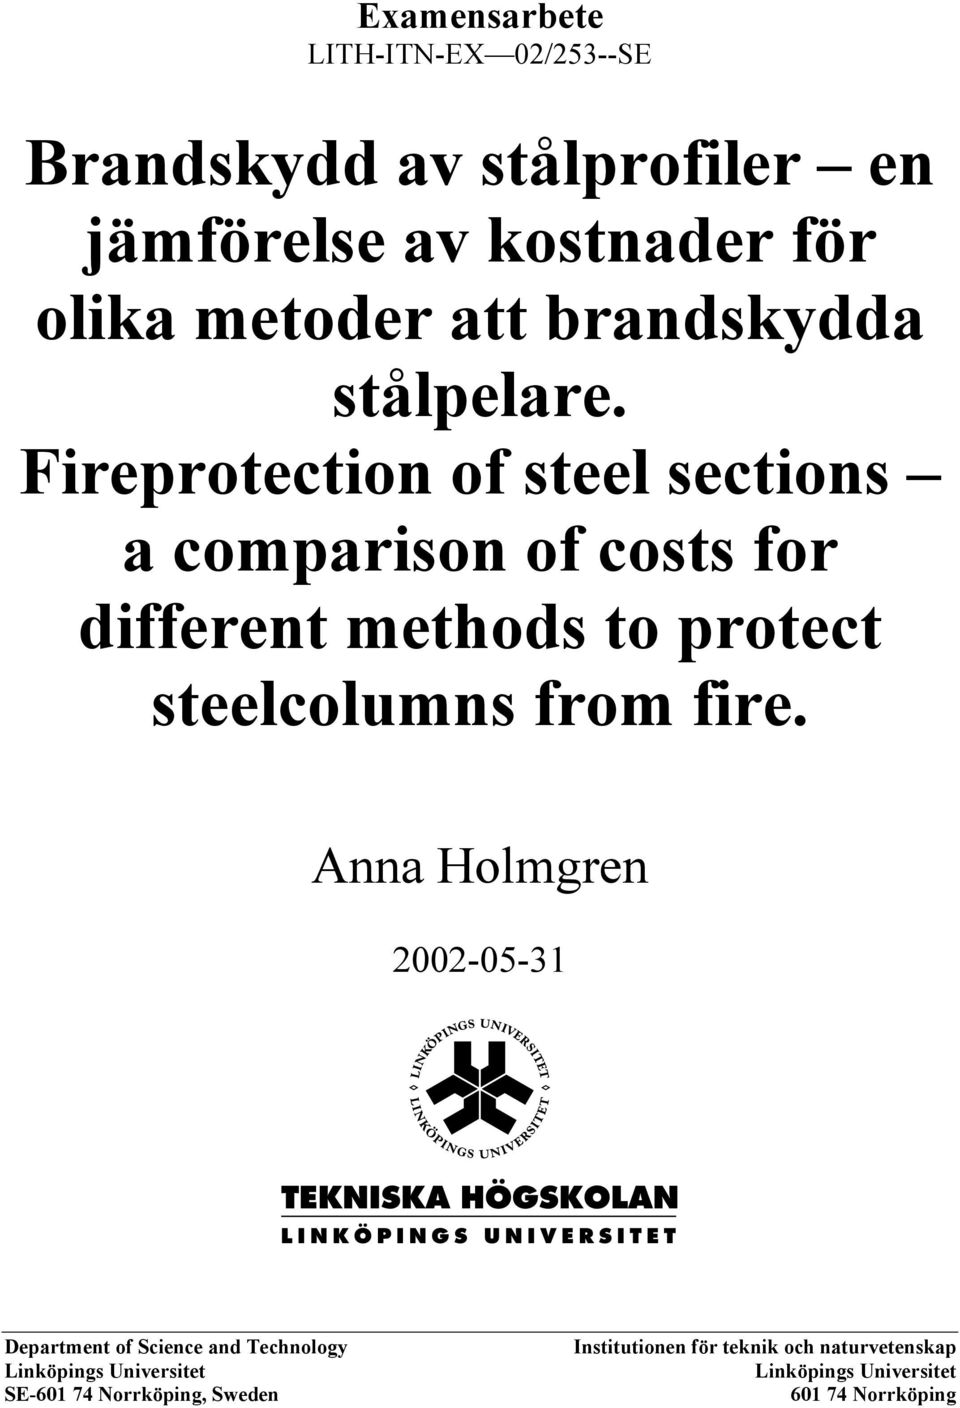 Fireprotection of steel sections a comparison of costs for different methods to protect steelcolumns from fire.